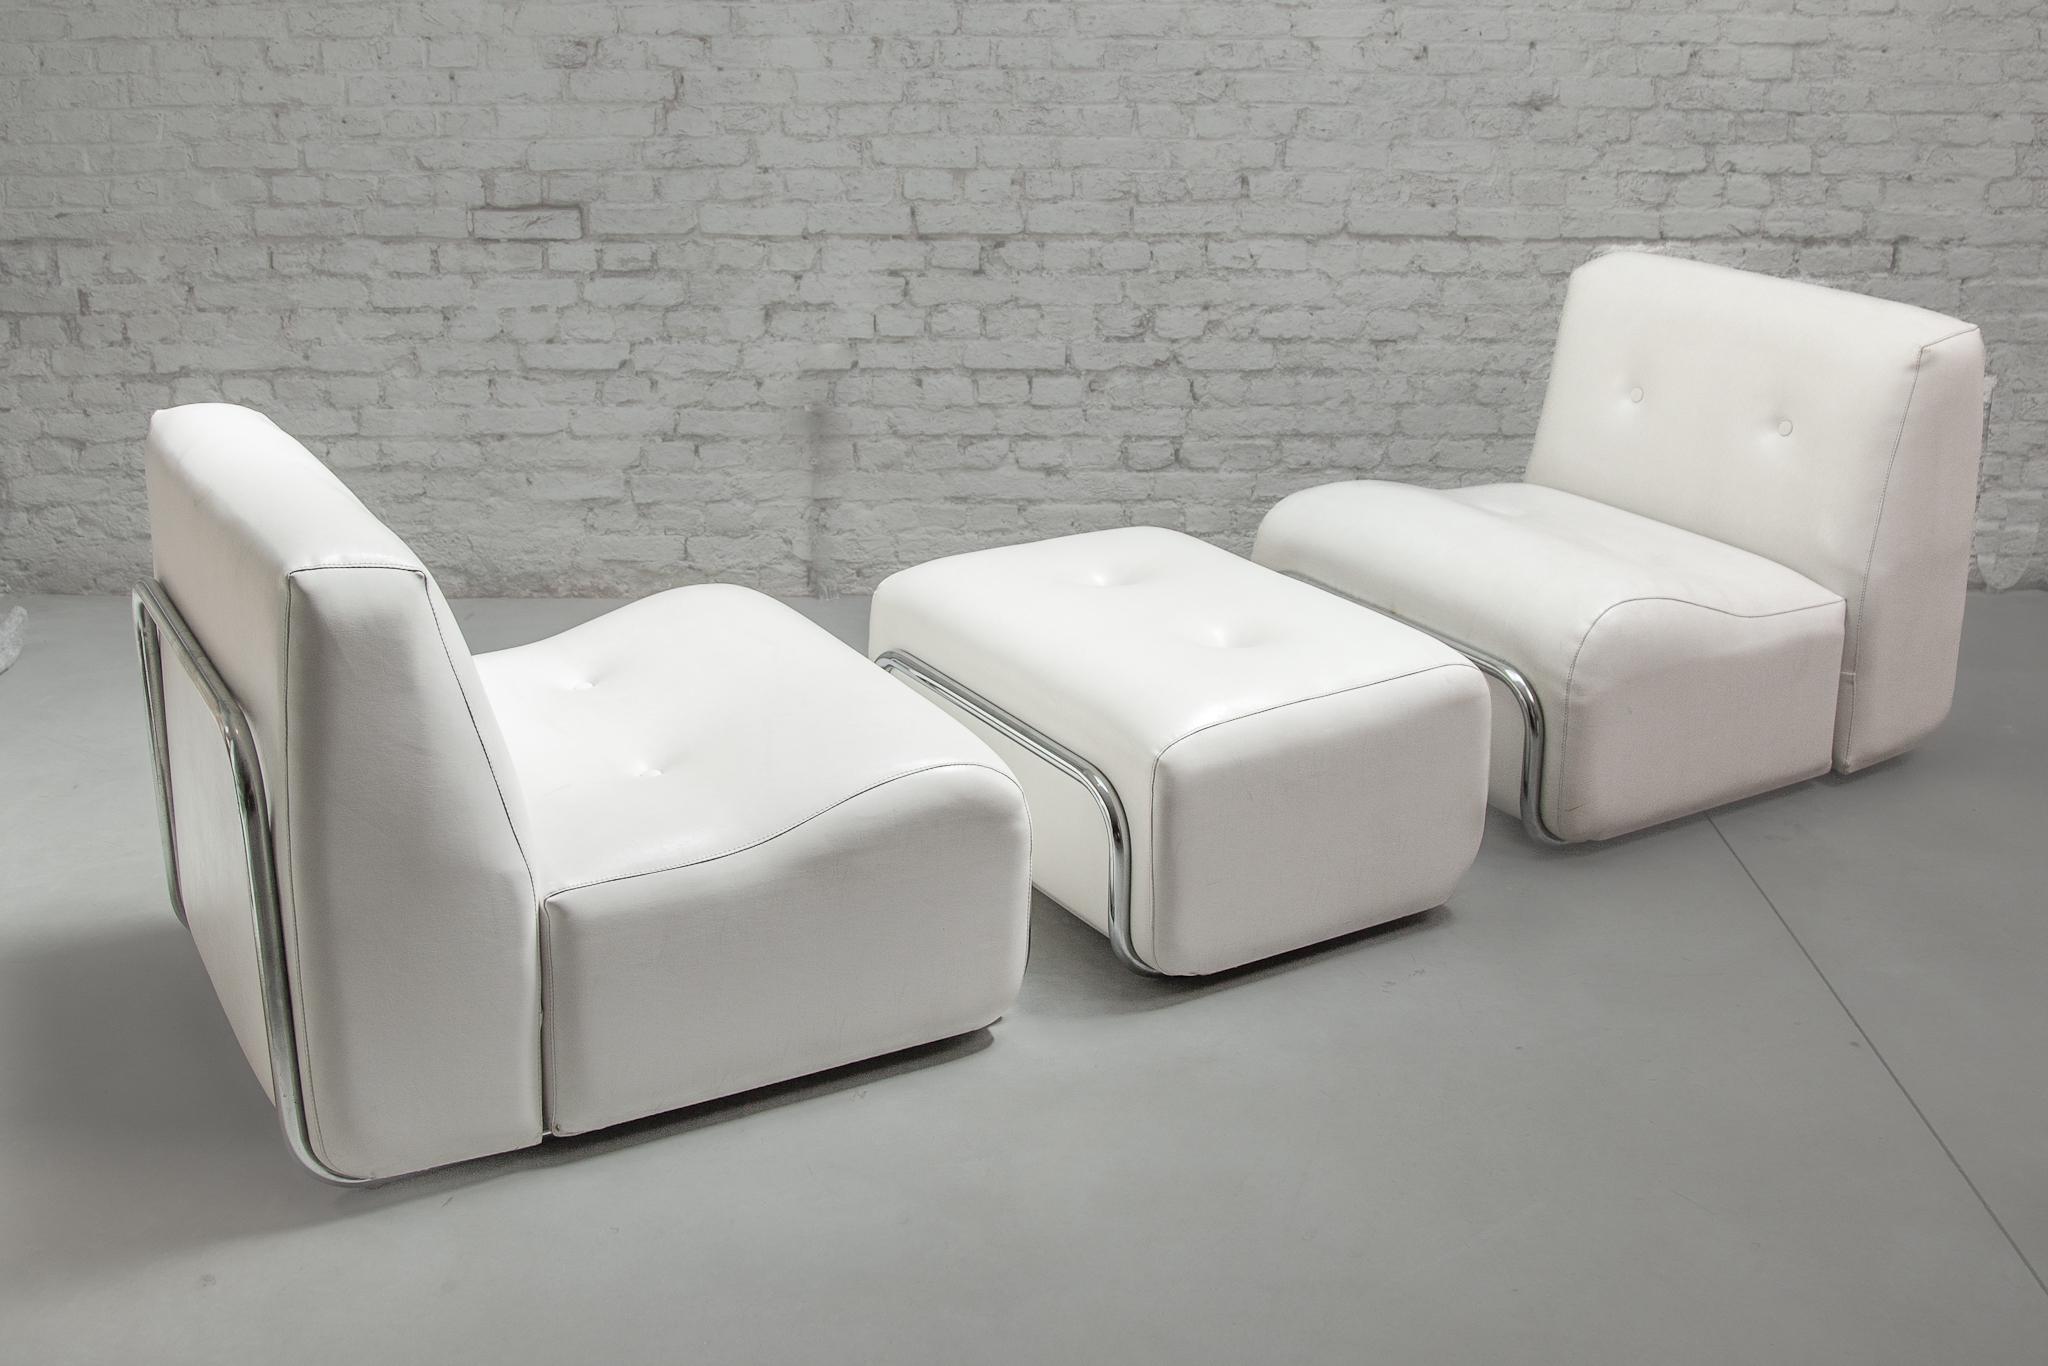 Modular Eight Chairs Living-roomset of Adriano Piazzesi Lounge Chairs and Stools 1